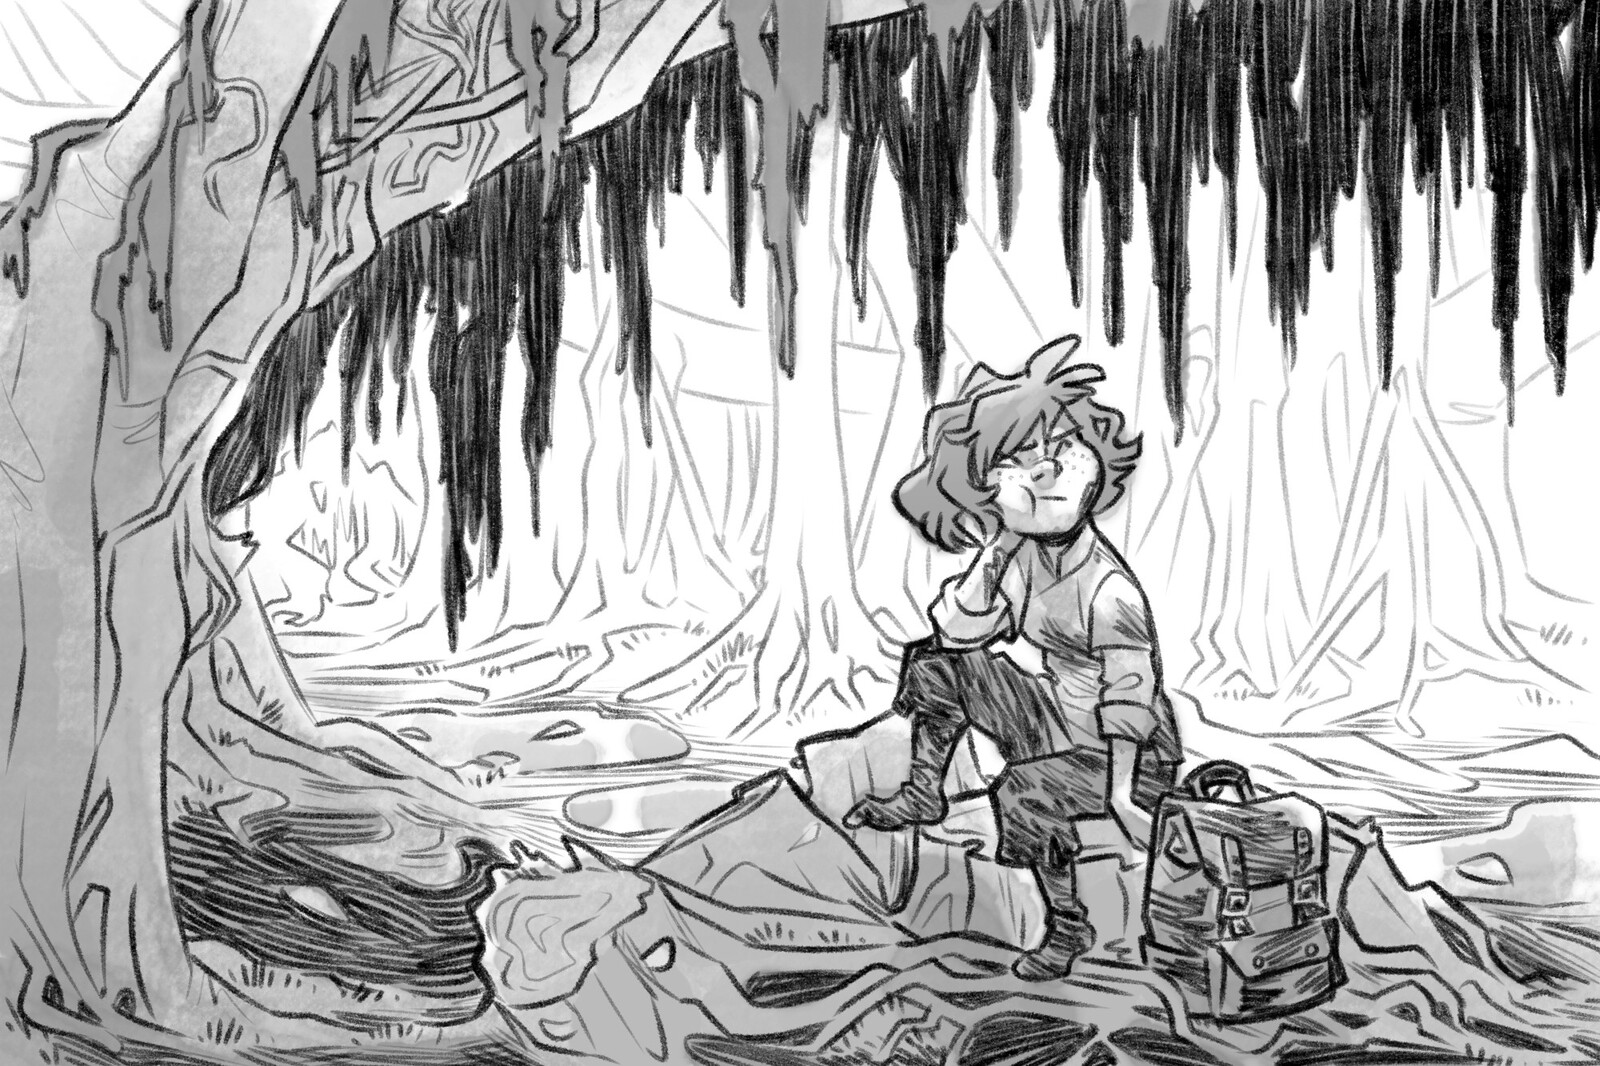 "Grit's drenched, of course. Everything below the waste is caked in foul-smelling mud, and her pants squelch when she does finally sit."